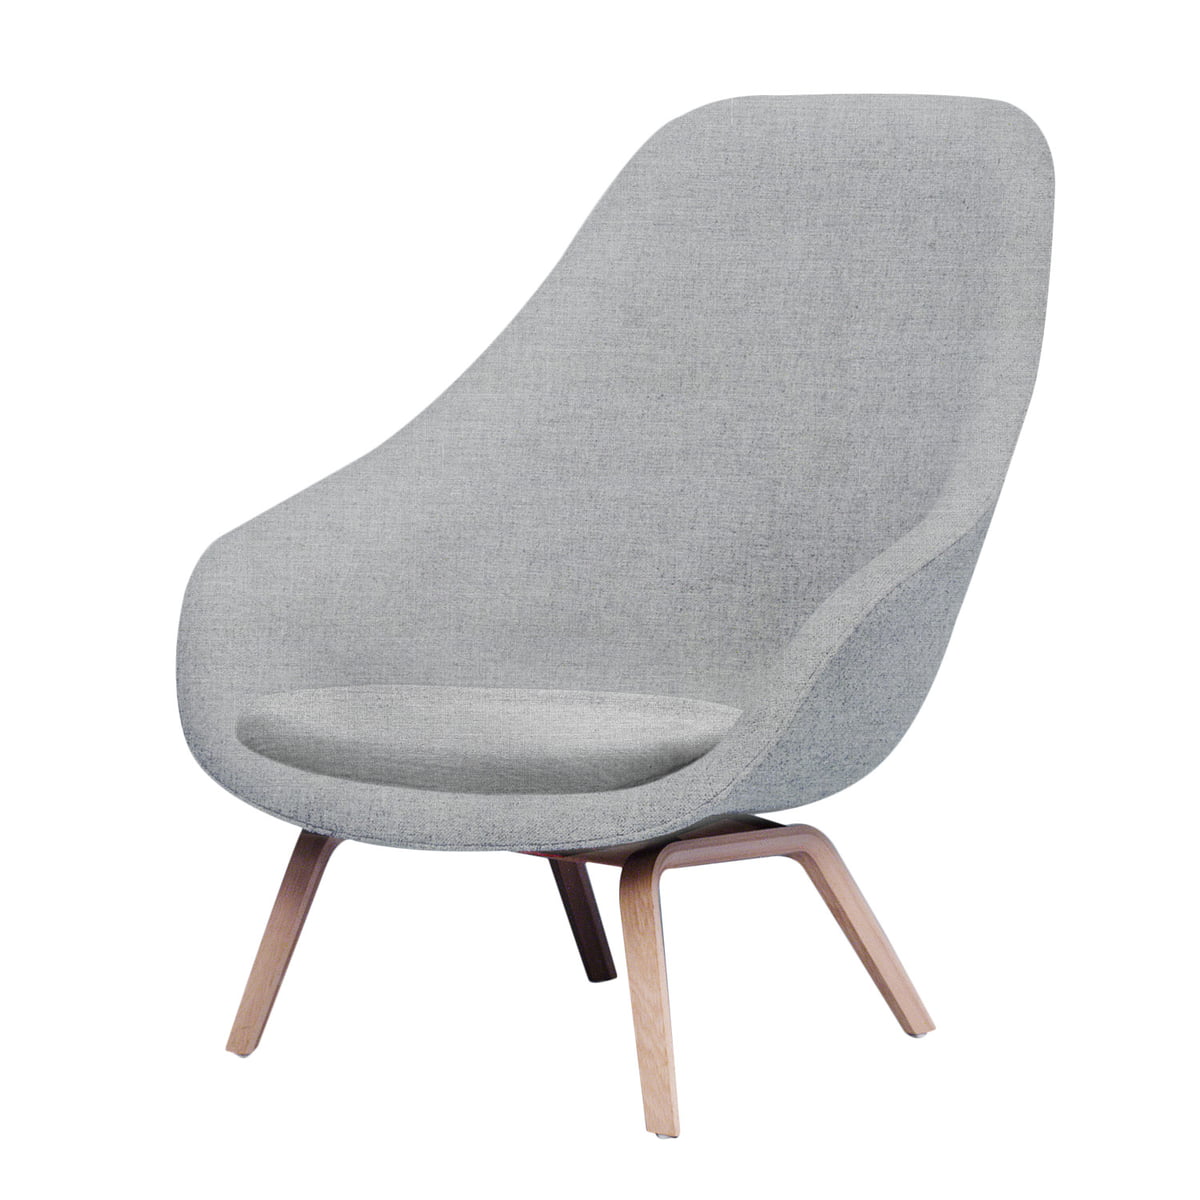 Hay About A Lounge Chair Aal 93 In The Shop